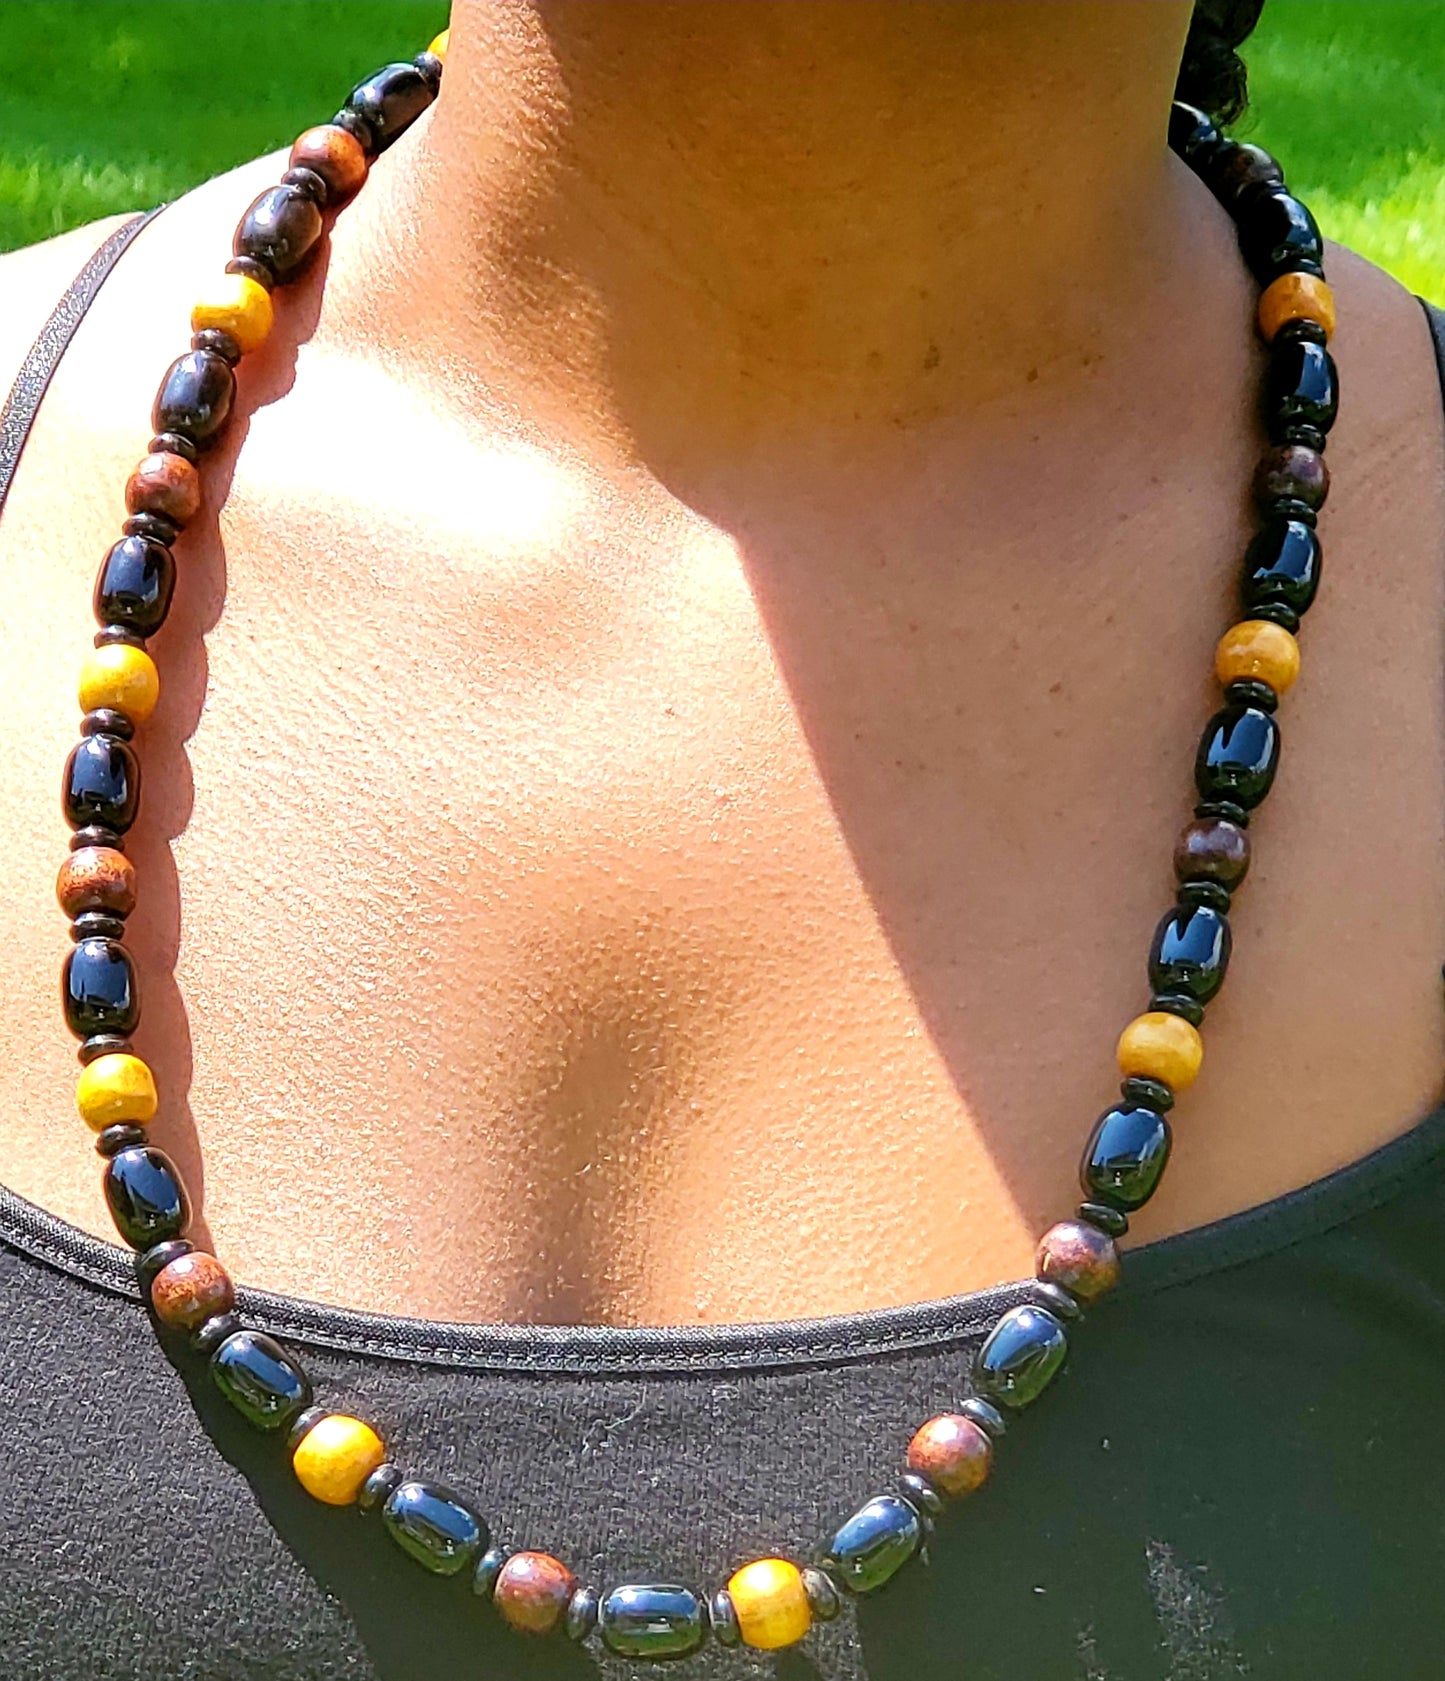 Traditional wooden beaded necklace, with lighter and darker beads interspersed